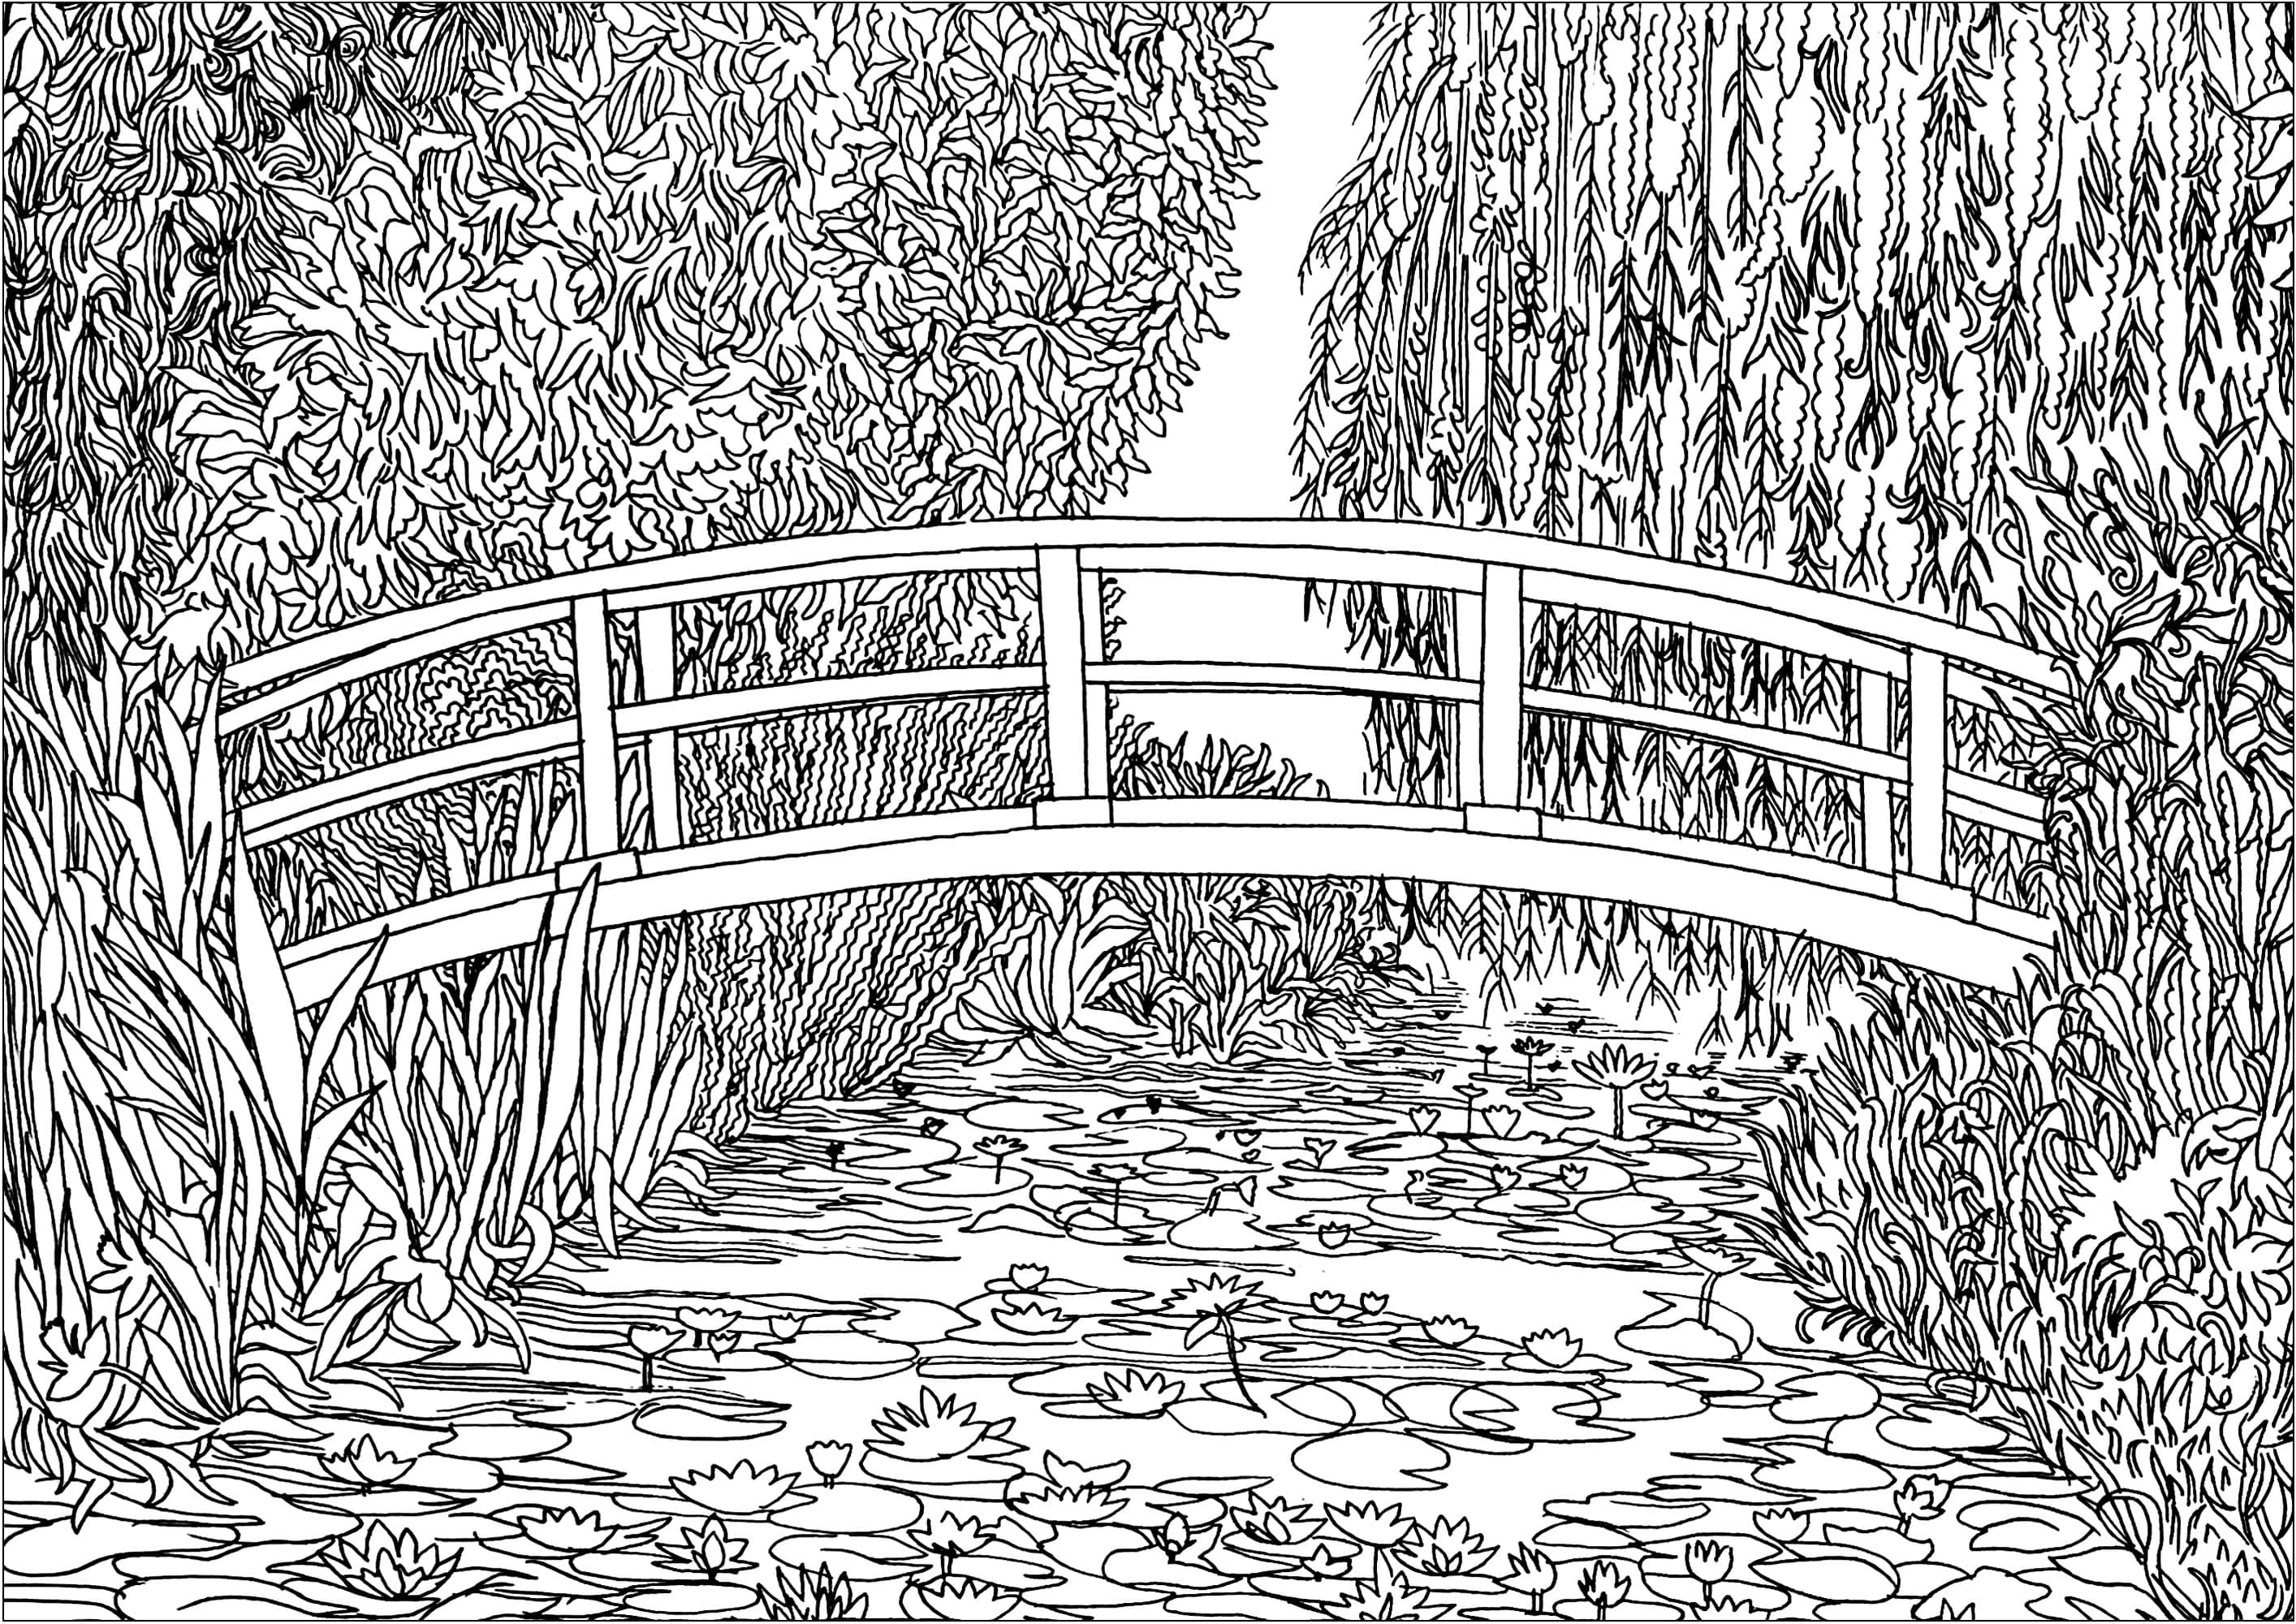 Coloring page created from 'The Water Lily Pond' (1899) by Claude Monet. In 1893, Monet, painter but also passionate horticulturist, purchased land with a pond near his property in Giverny (France), intending to build something 'for the pleasure of the eye and also for motifs to paint'. The result was his water-lily pond.